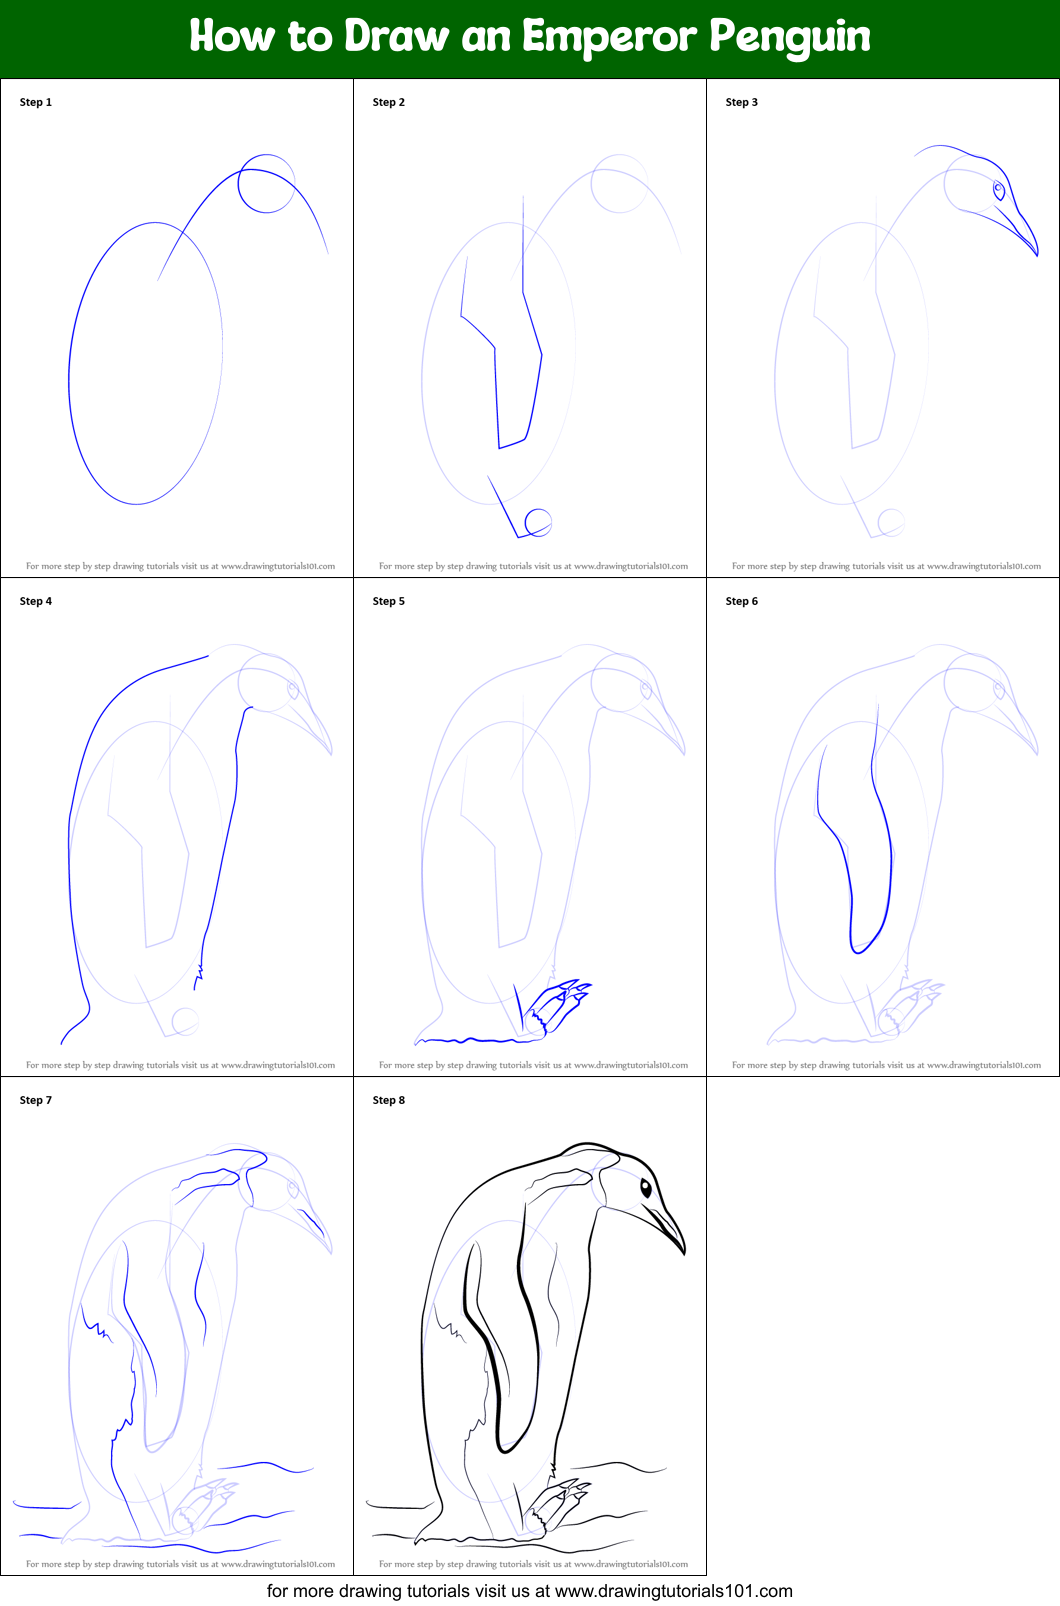 How to Draw an Emperor Penguin printable step by step drawing sheet